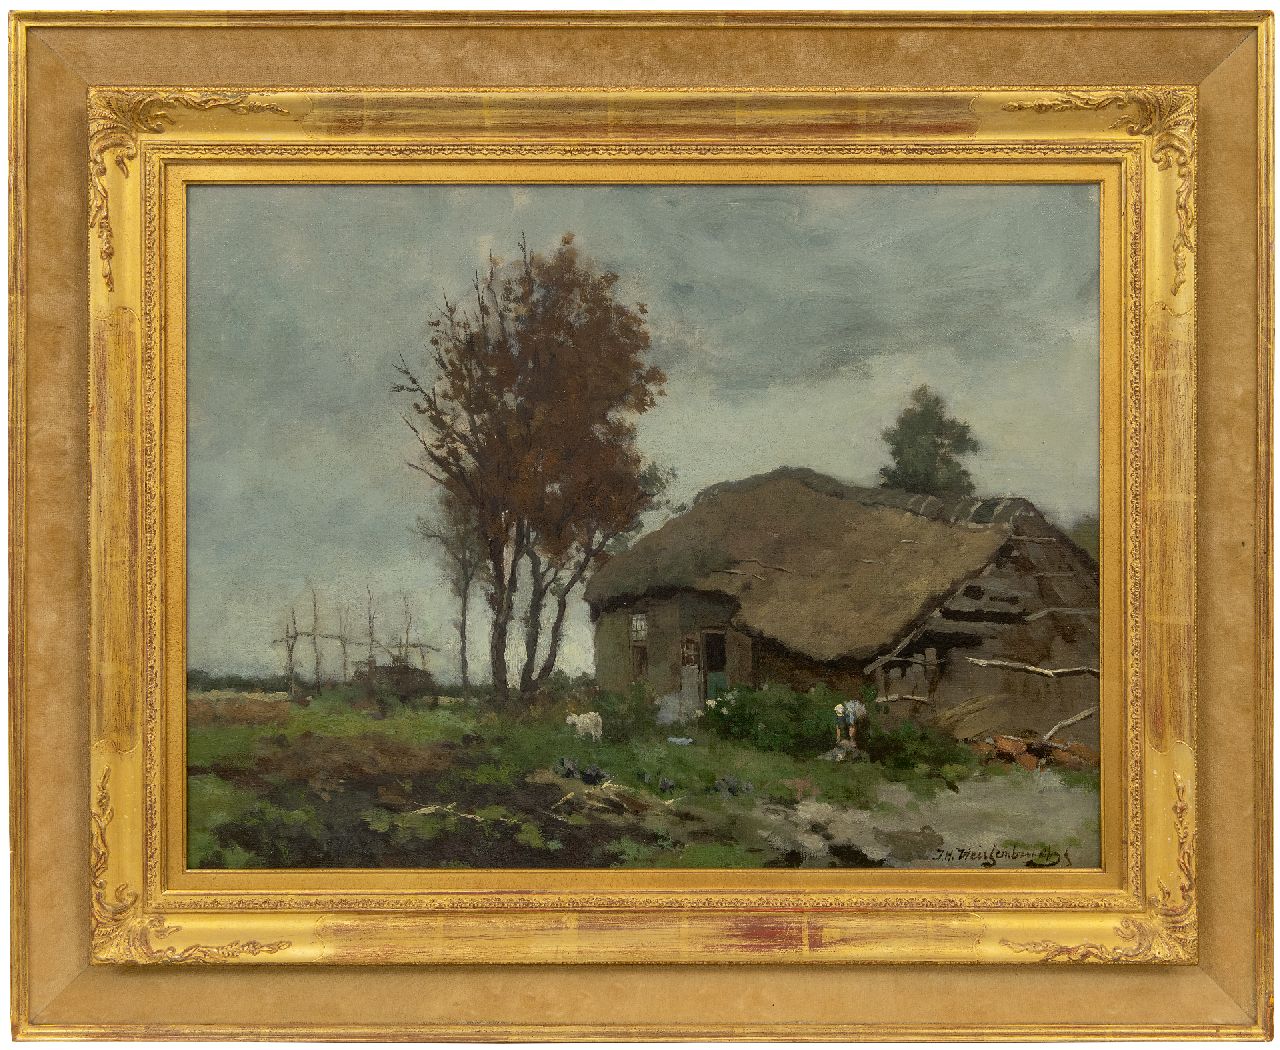 Weissenbruch H.J.  | Hendrik Johannes 'J.H.' Weissenbruch | Paintings offered for sale | The old farm, oil on canvas 45.8 x 60.8 cm, signed l.r.